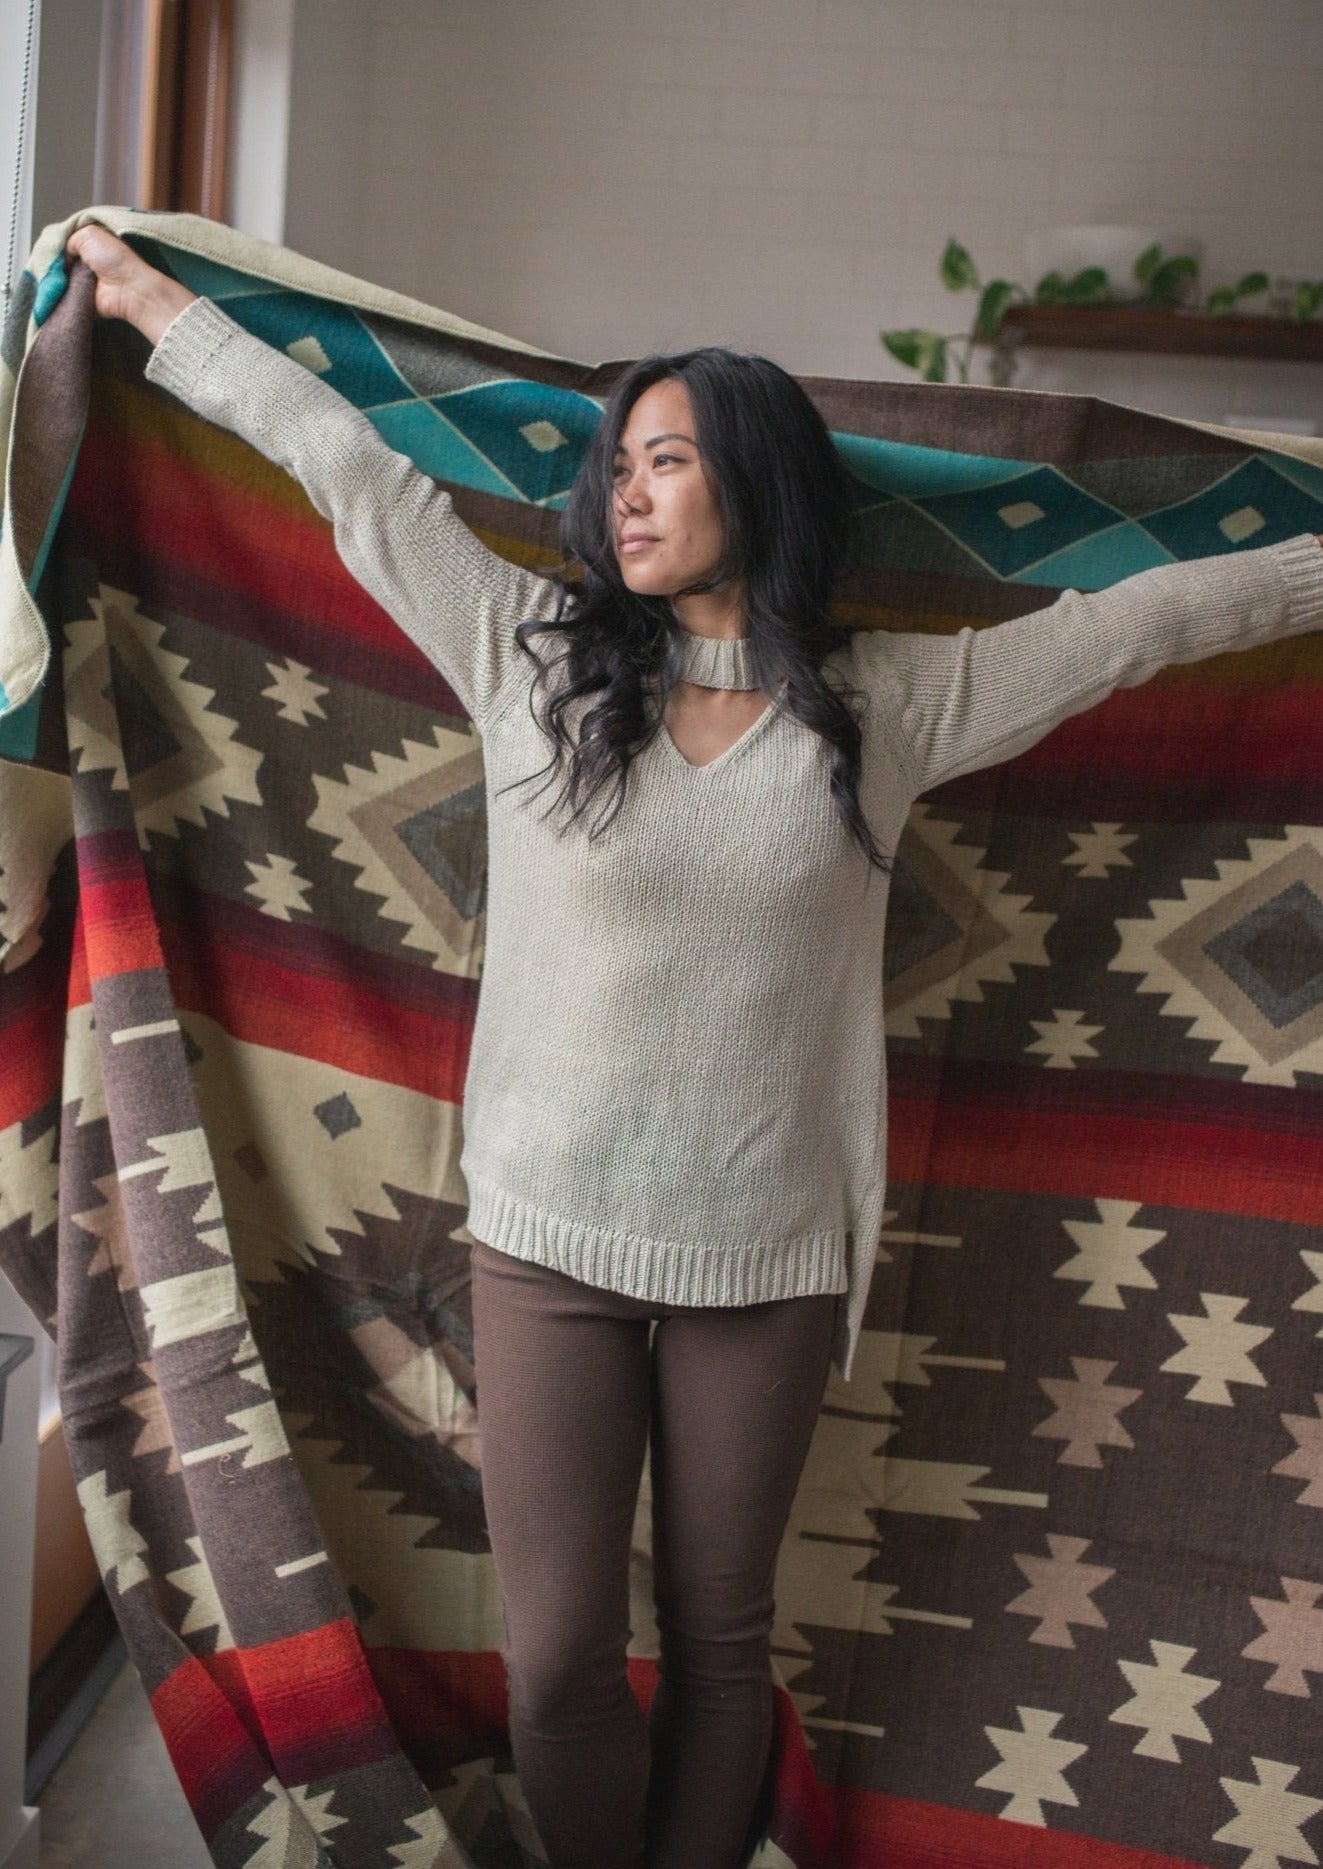 Asian girls arms are wide open holding her cozy alpaca blanket made in ecuador. 